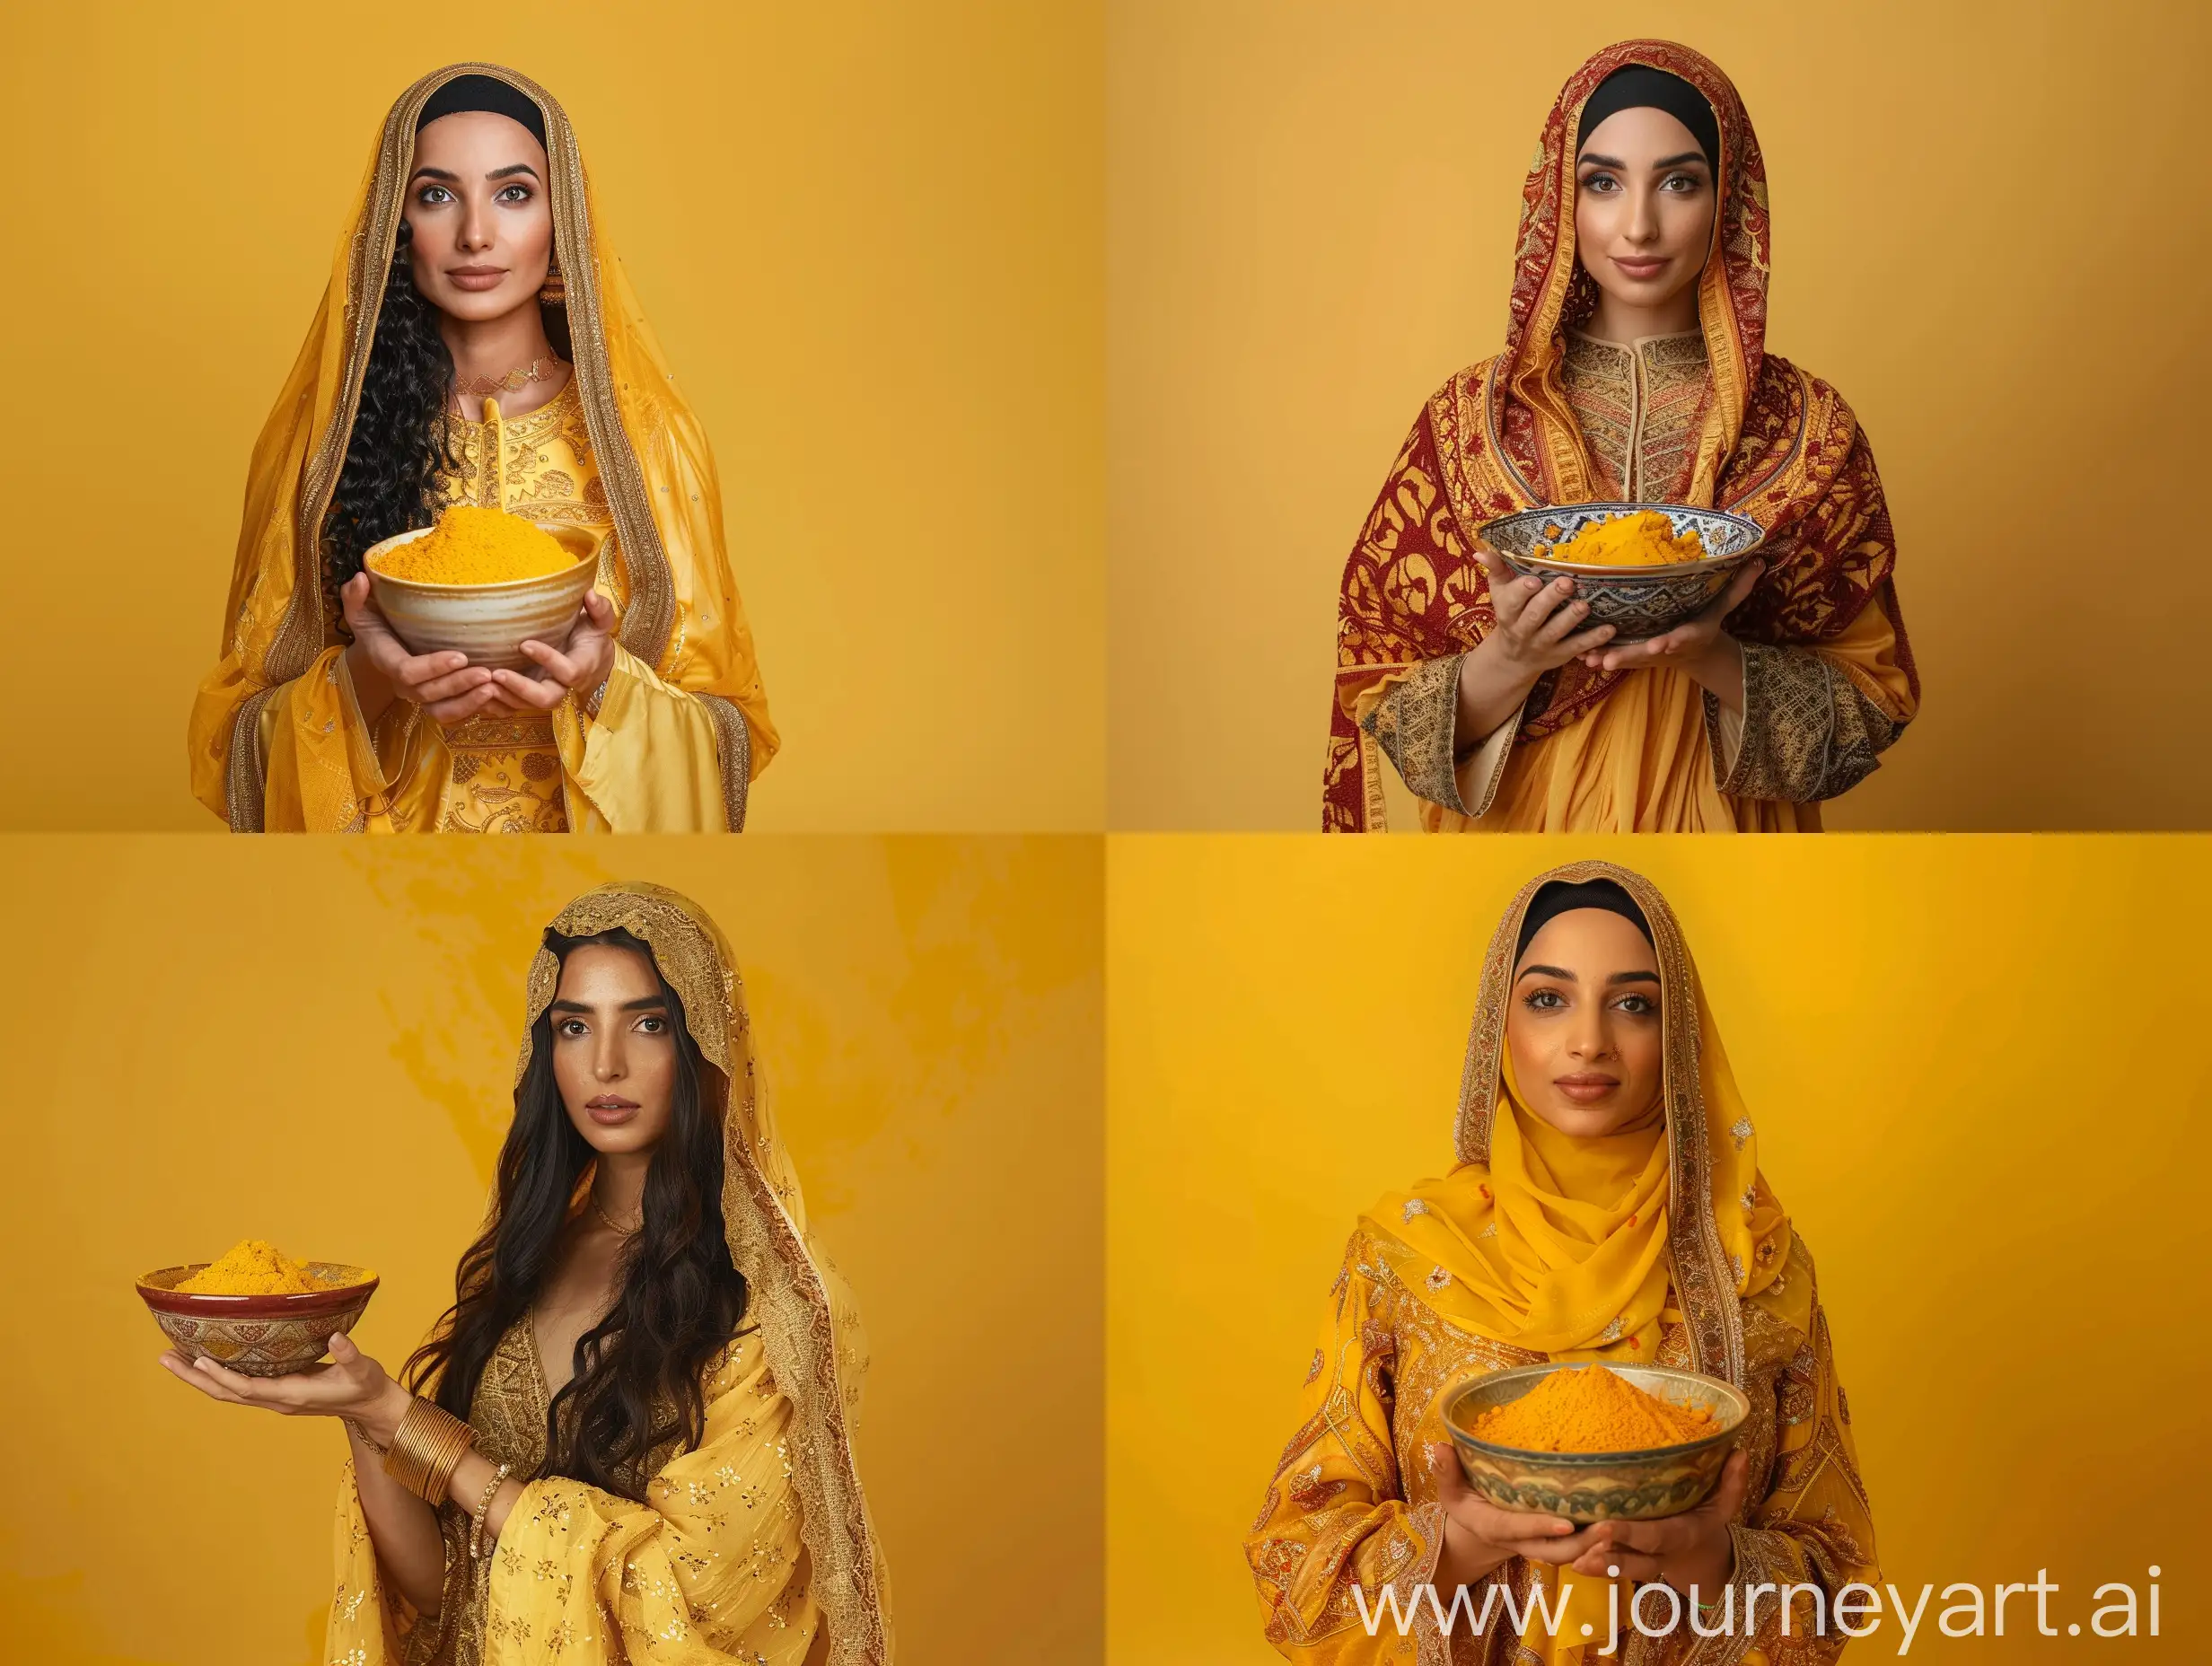 Studio shot against a rich yellow background of a woman in Arabic dress holding a bowl of turmeric